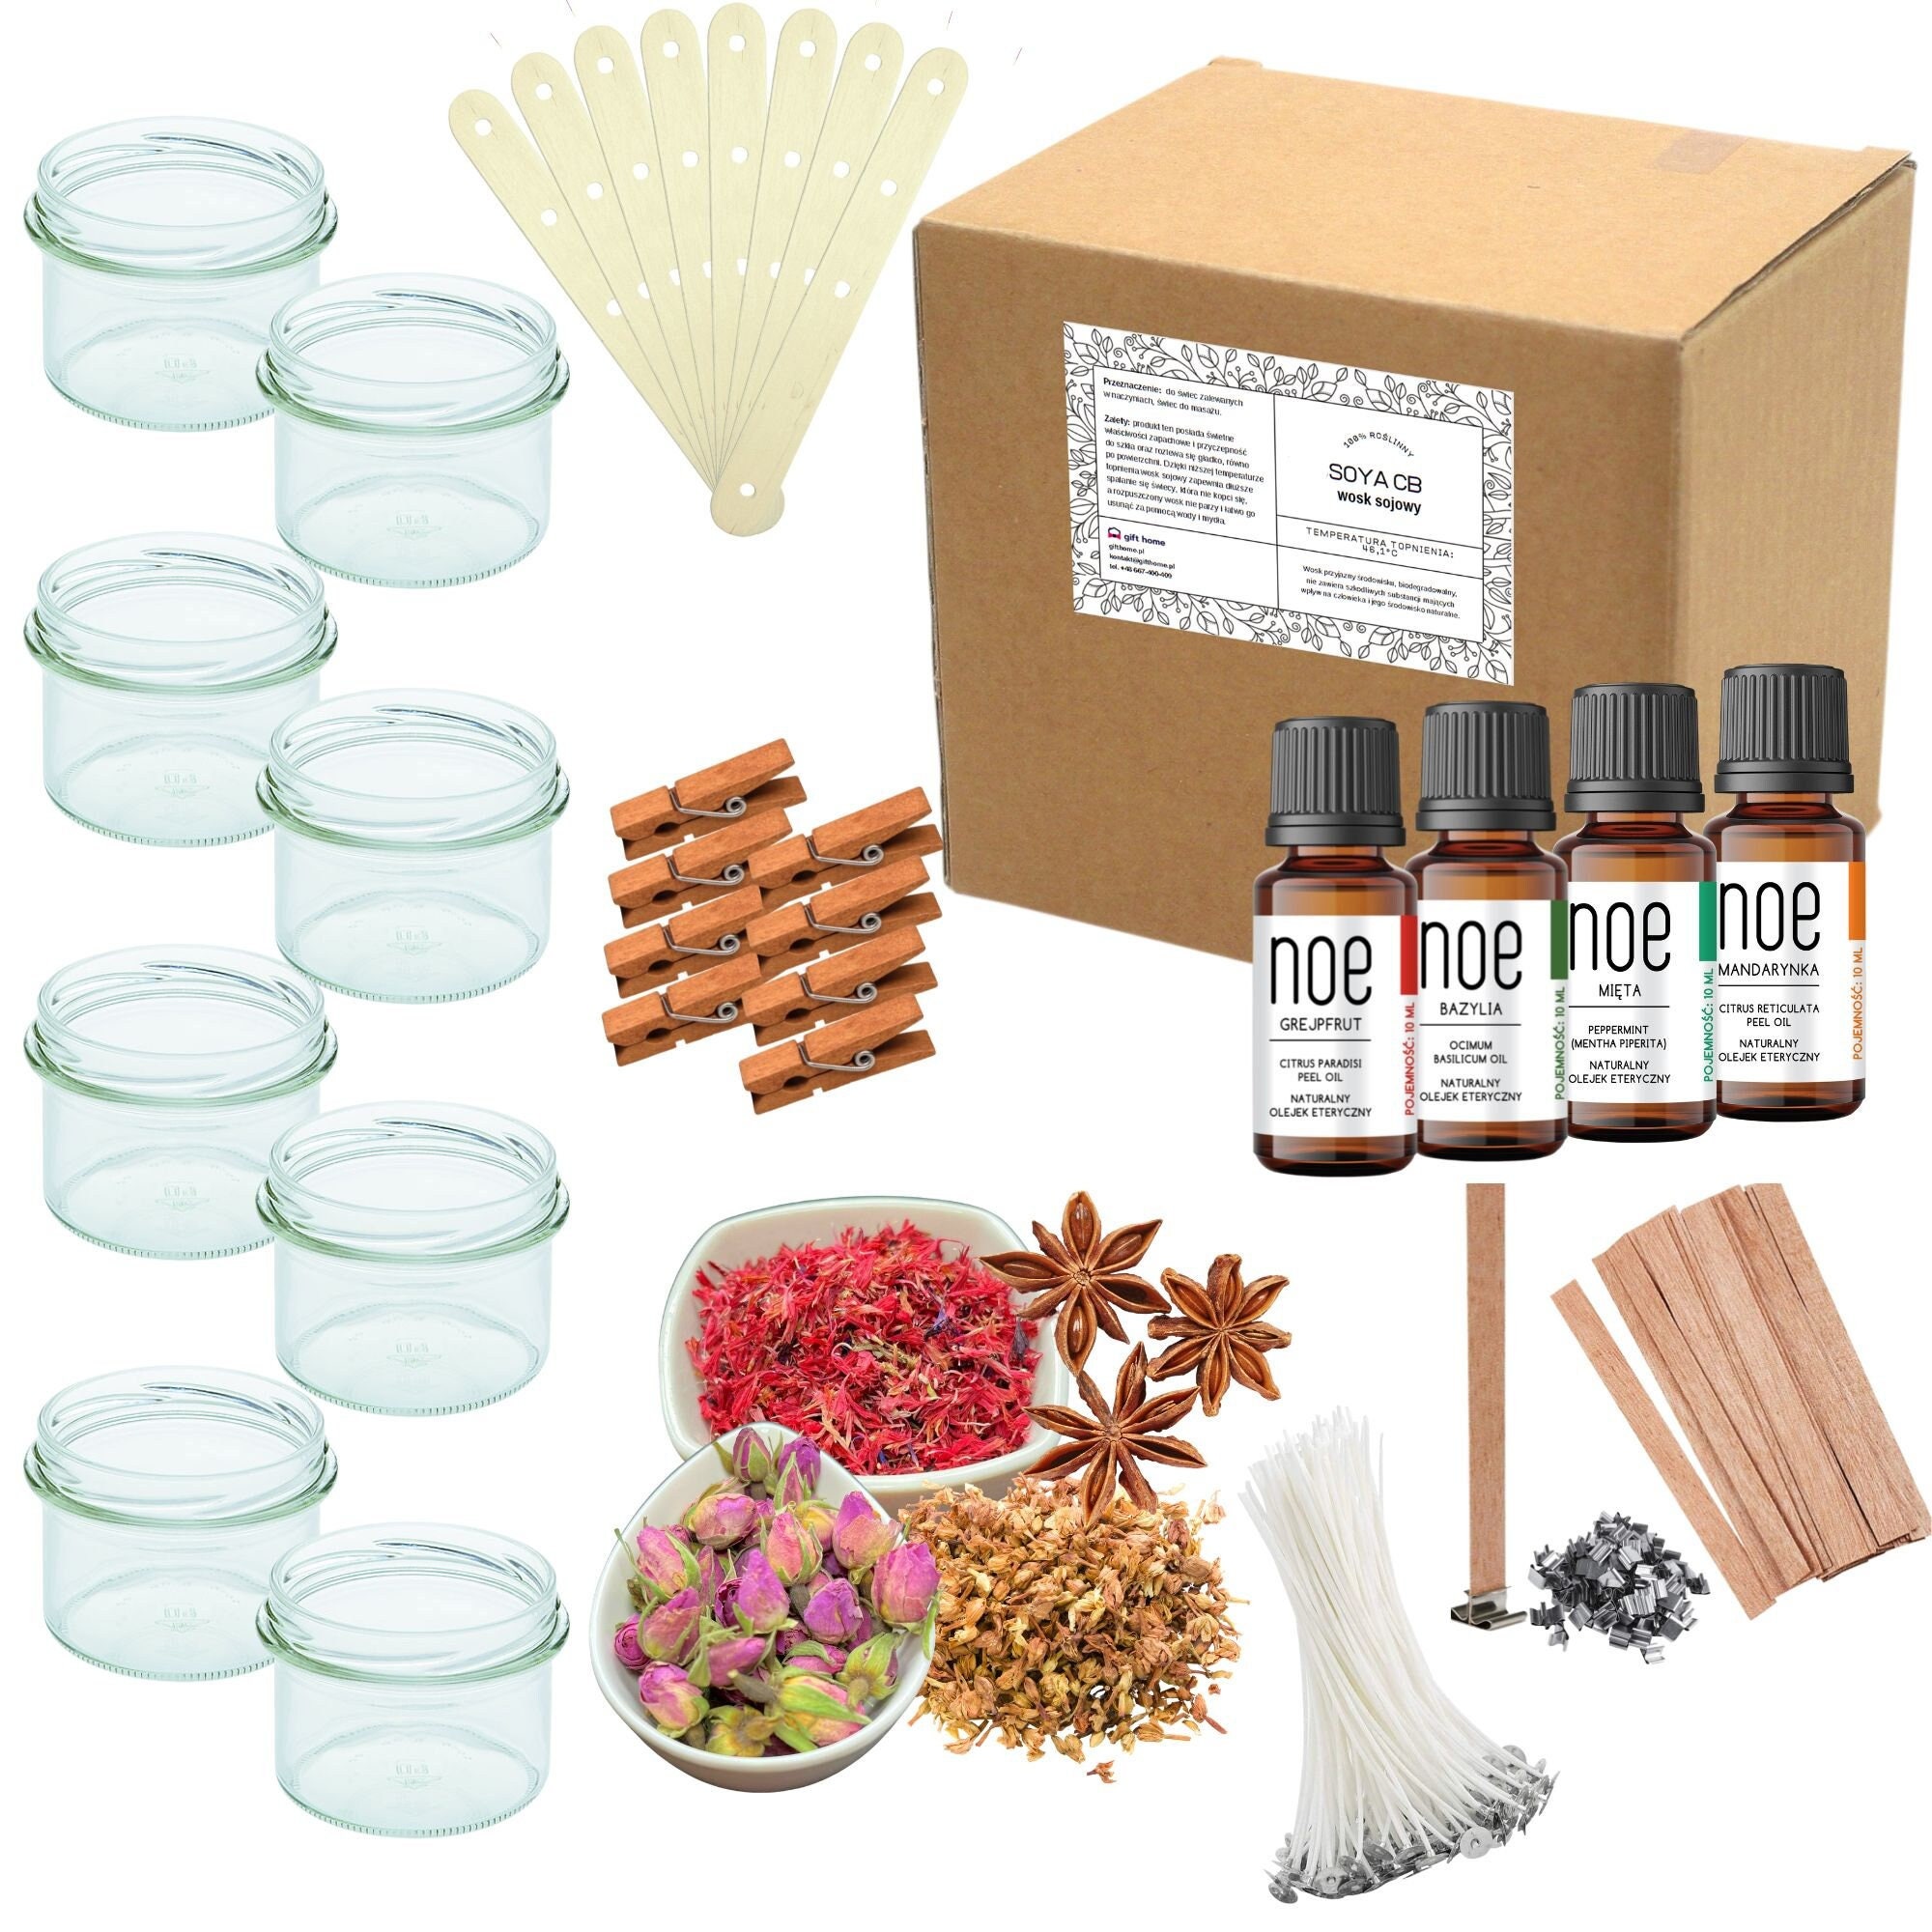 Natural Beeswax Candle Making Kit 7 Sheets of Beeswax DIY Candle Rolling  and Decorating Crafts for Adults, Teens & Kids by Candleology 